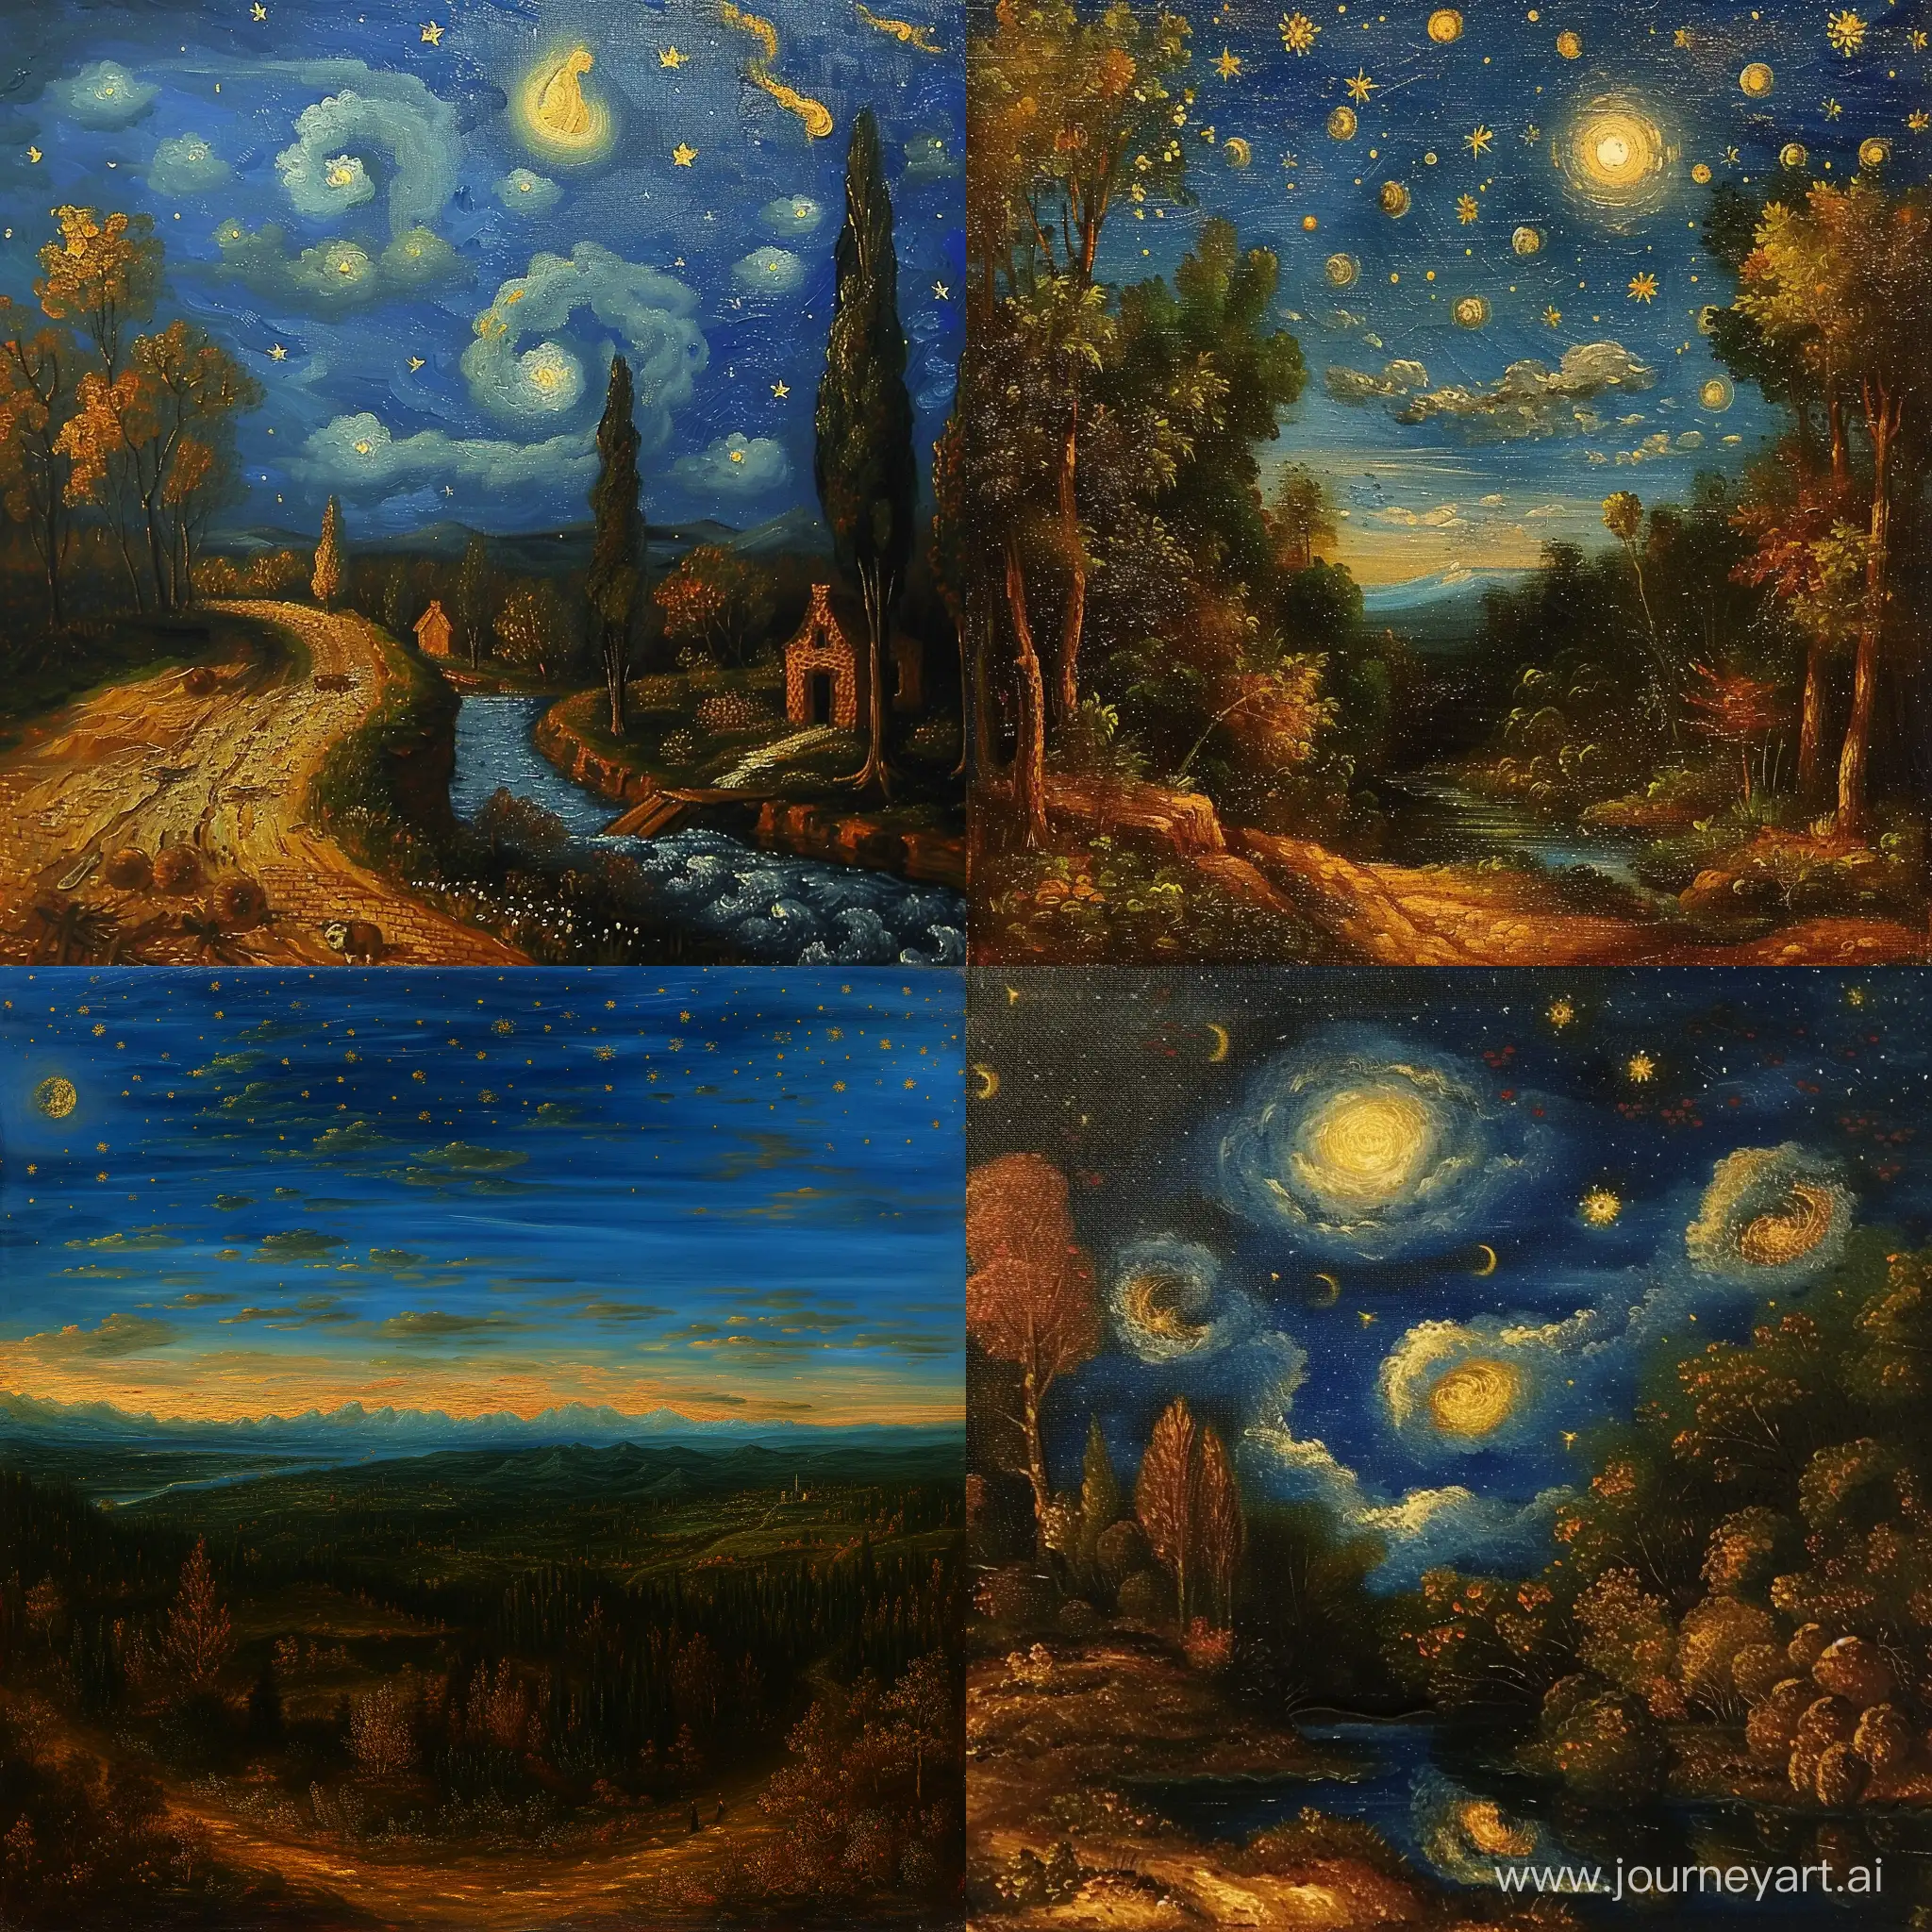 Vivid-Landscape-Painting-Starry-Night-and-Italian-Countryside